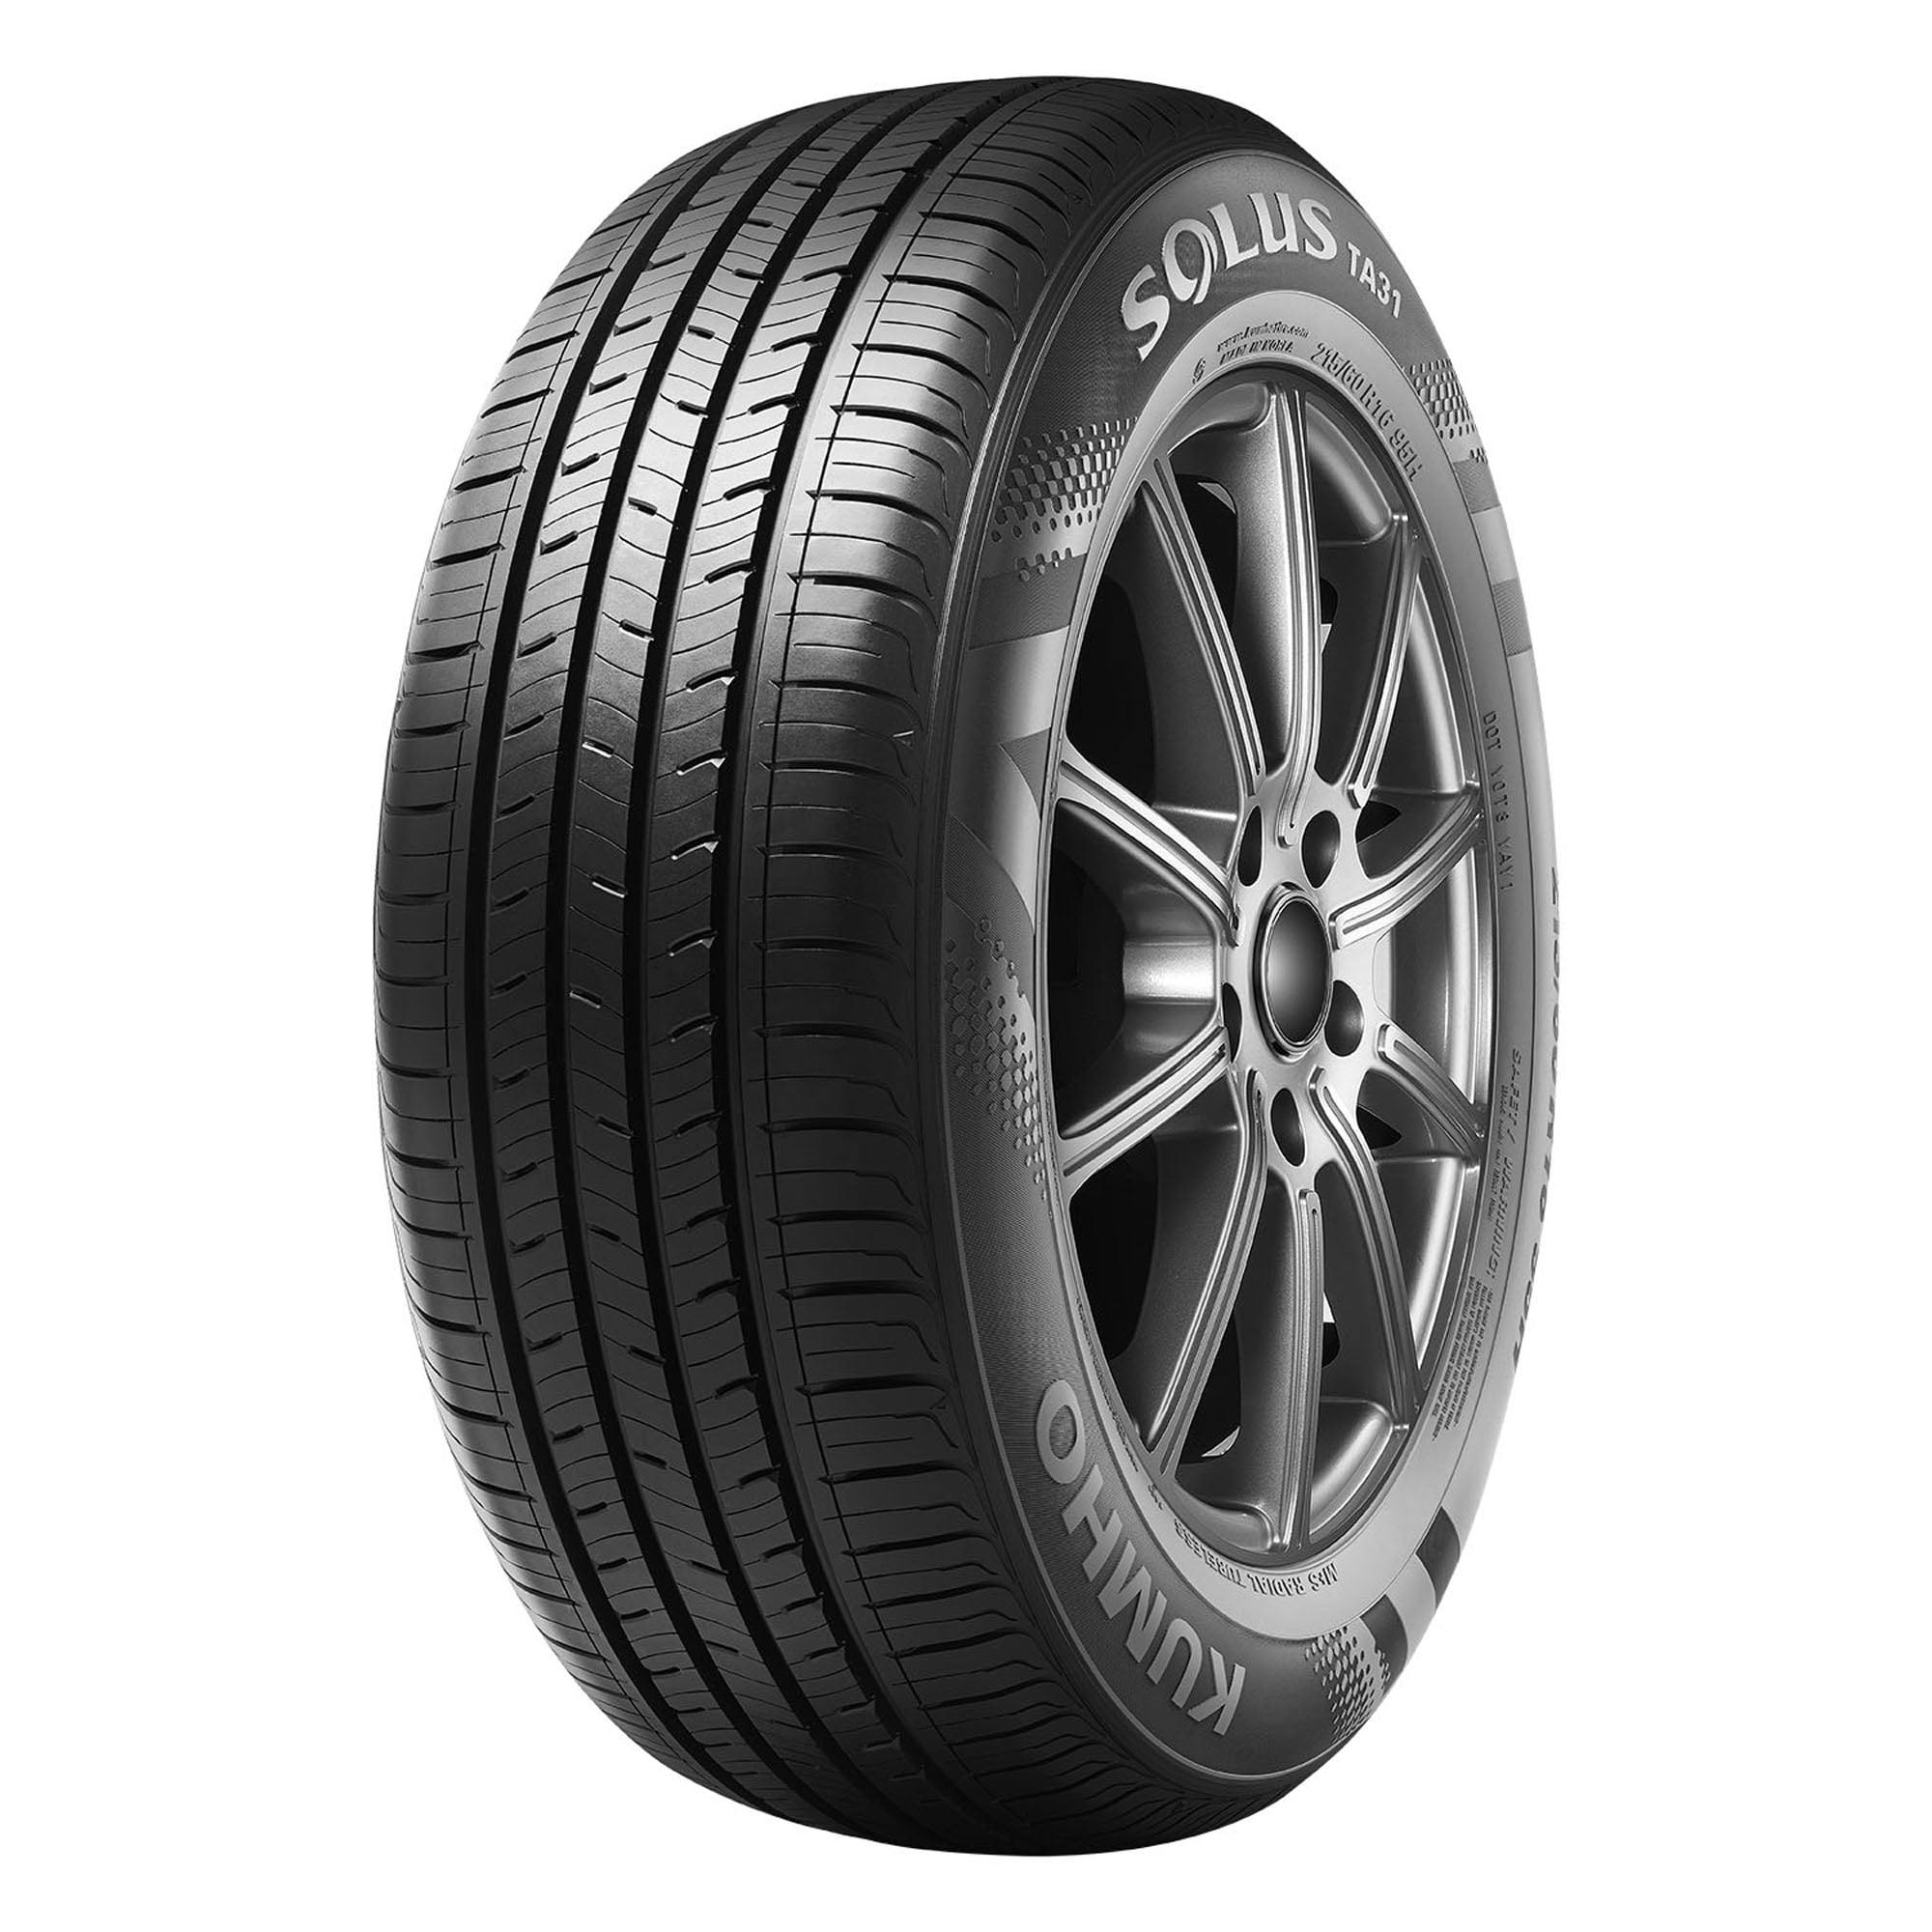 X4 205 55 16 TOYO PROXES COMFORT AMAZING C,A RATED QUALITY TYRES 205/55R16  91V